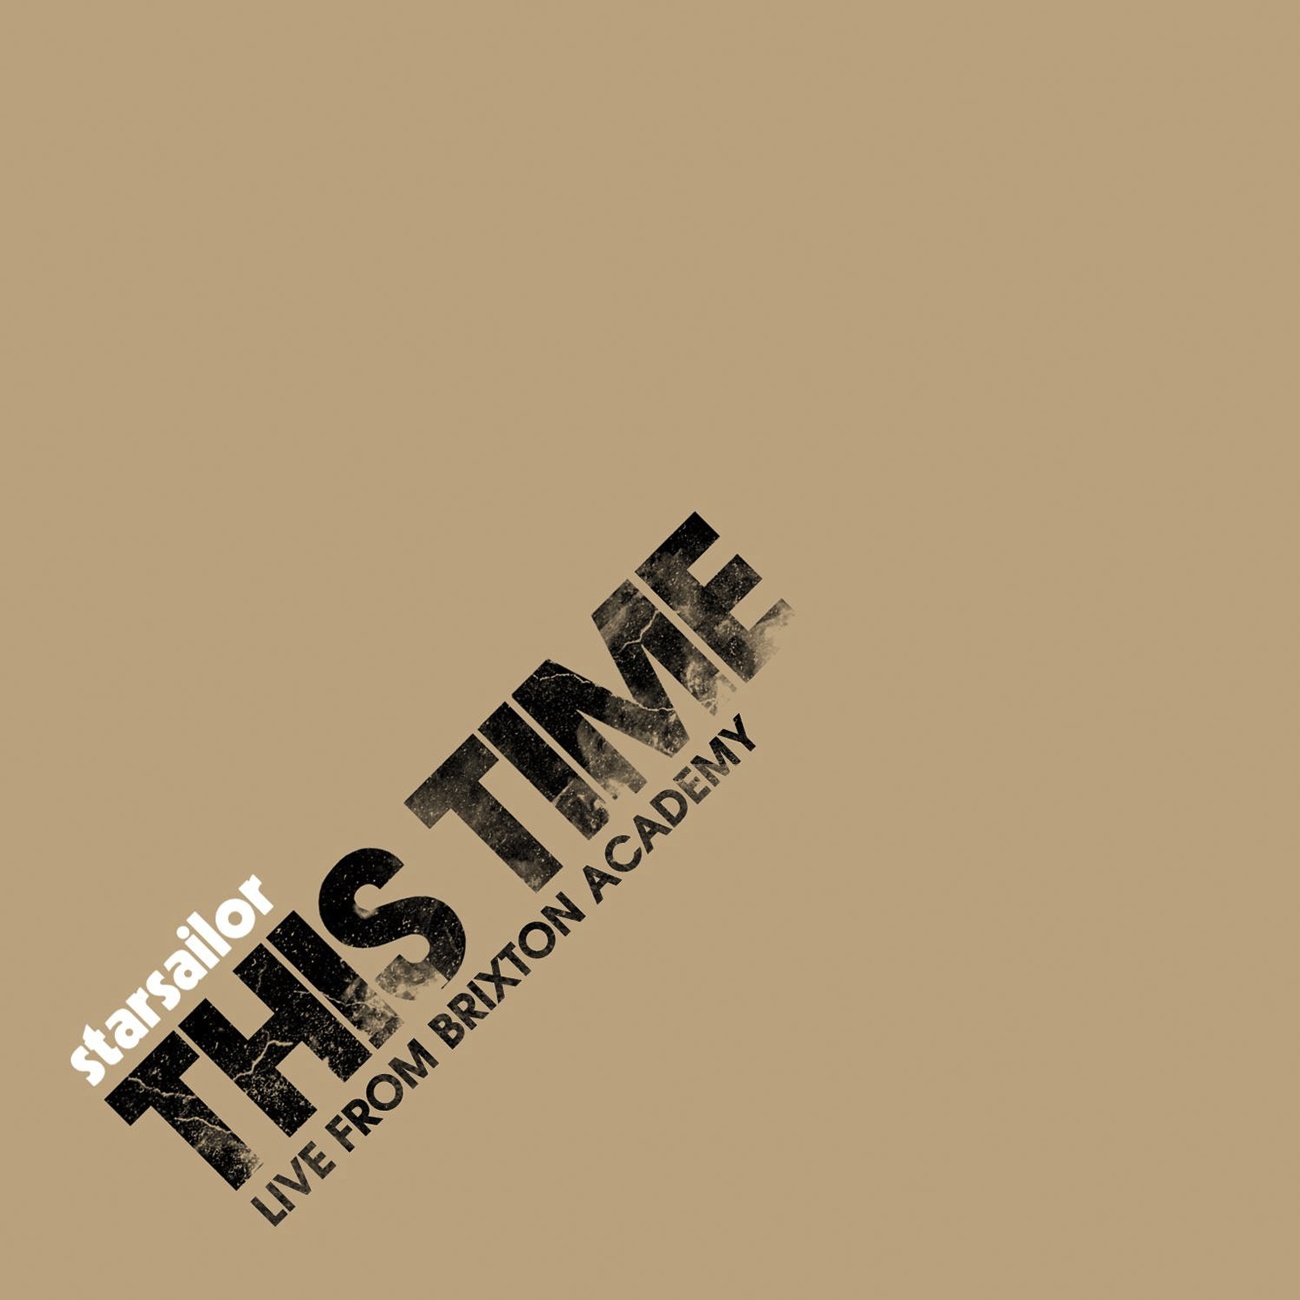 This Time (Recorded Live At Brixton Academy On 18th November 2005)